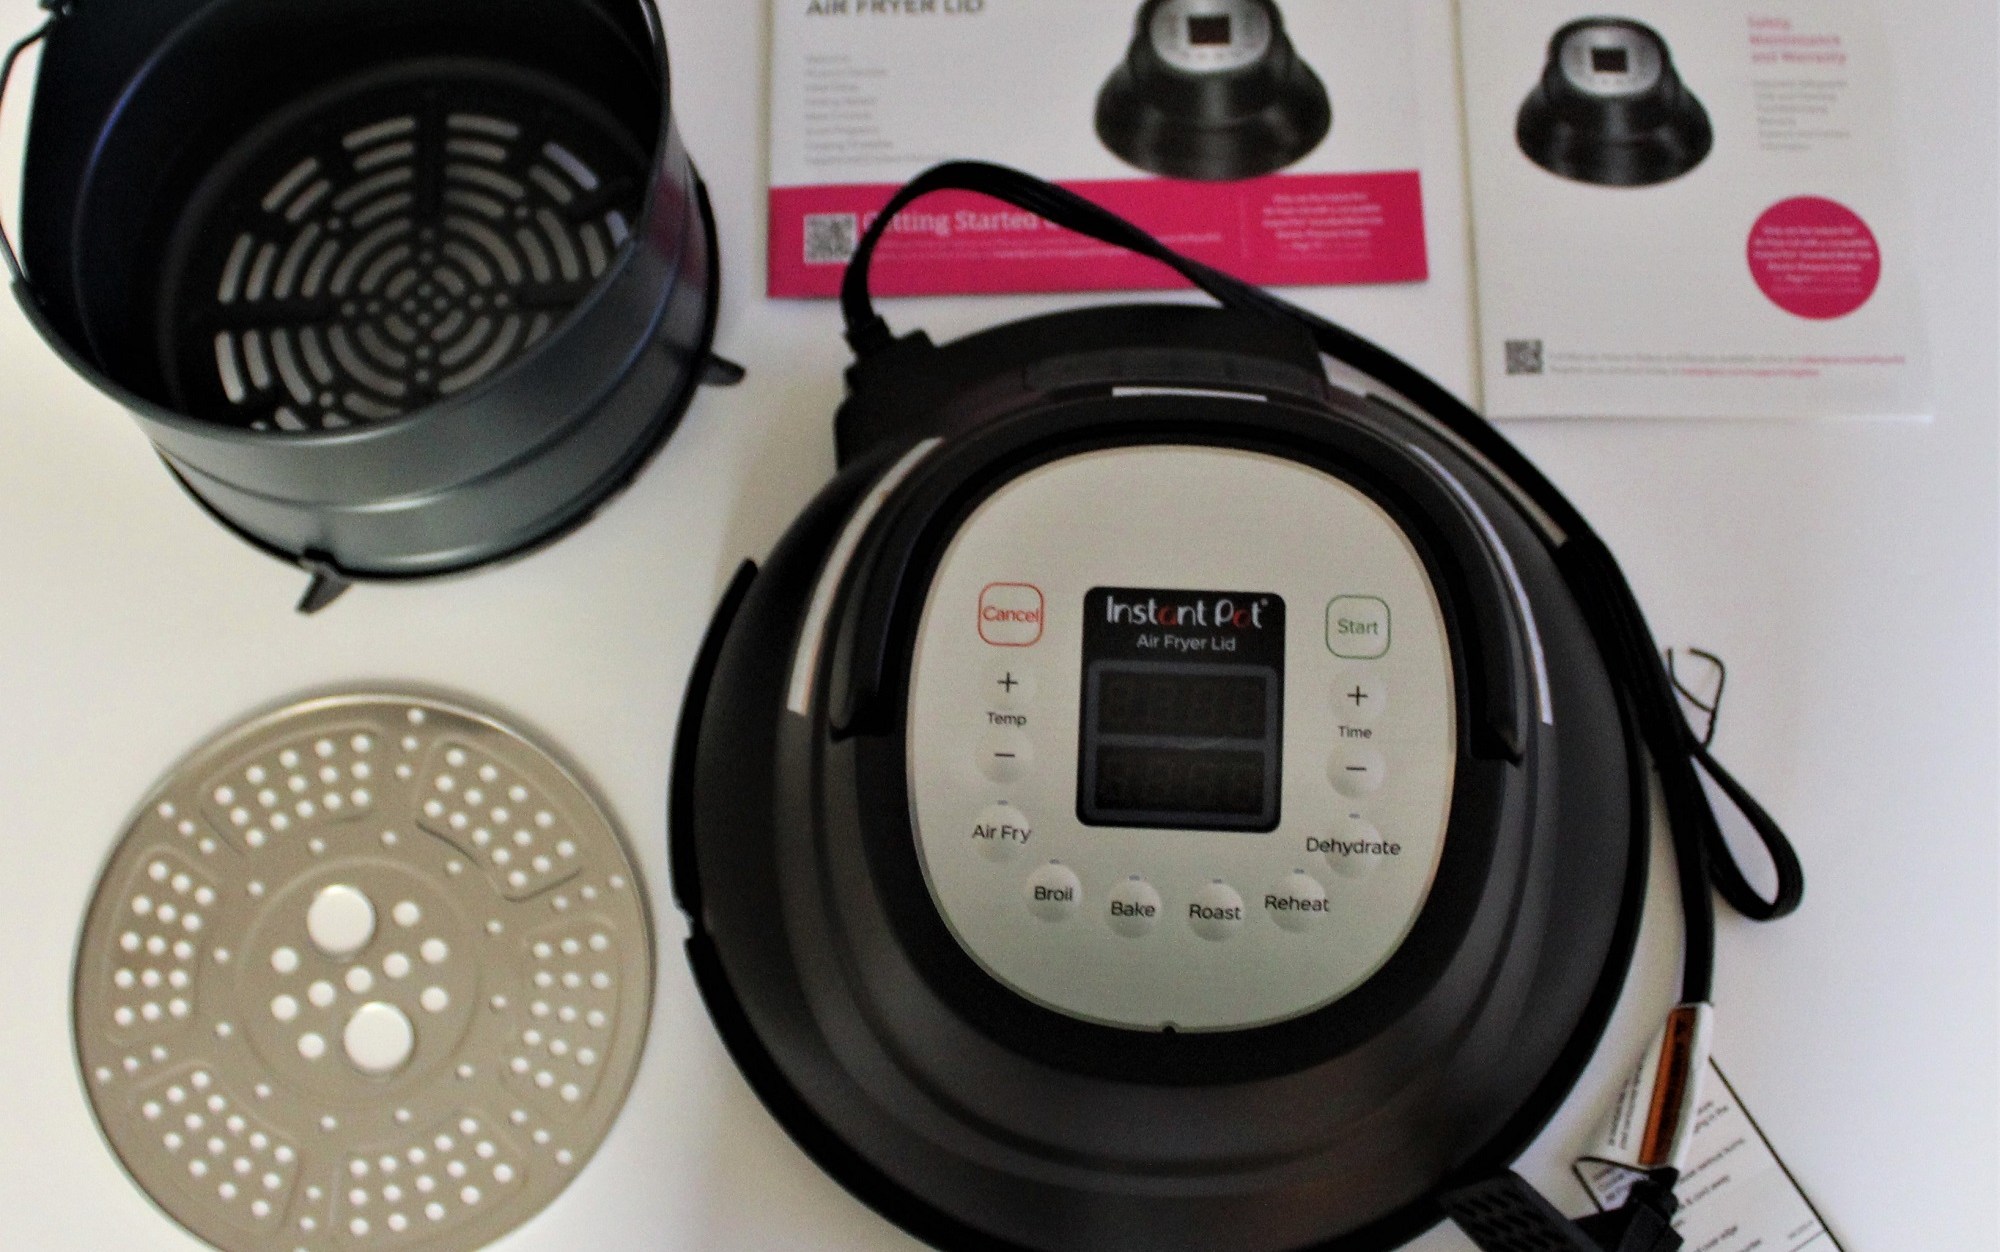 Instant Pot AIR FRYER LID + STORAGE PAD ONLY - See First Photo for